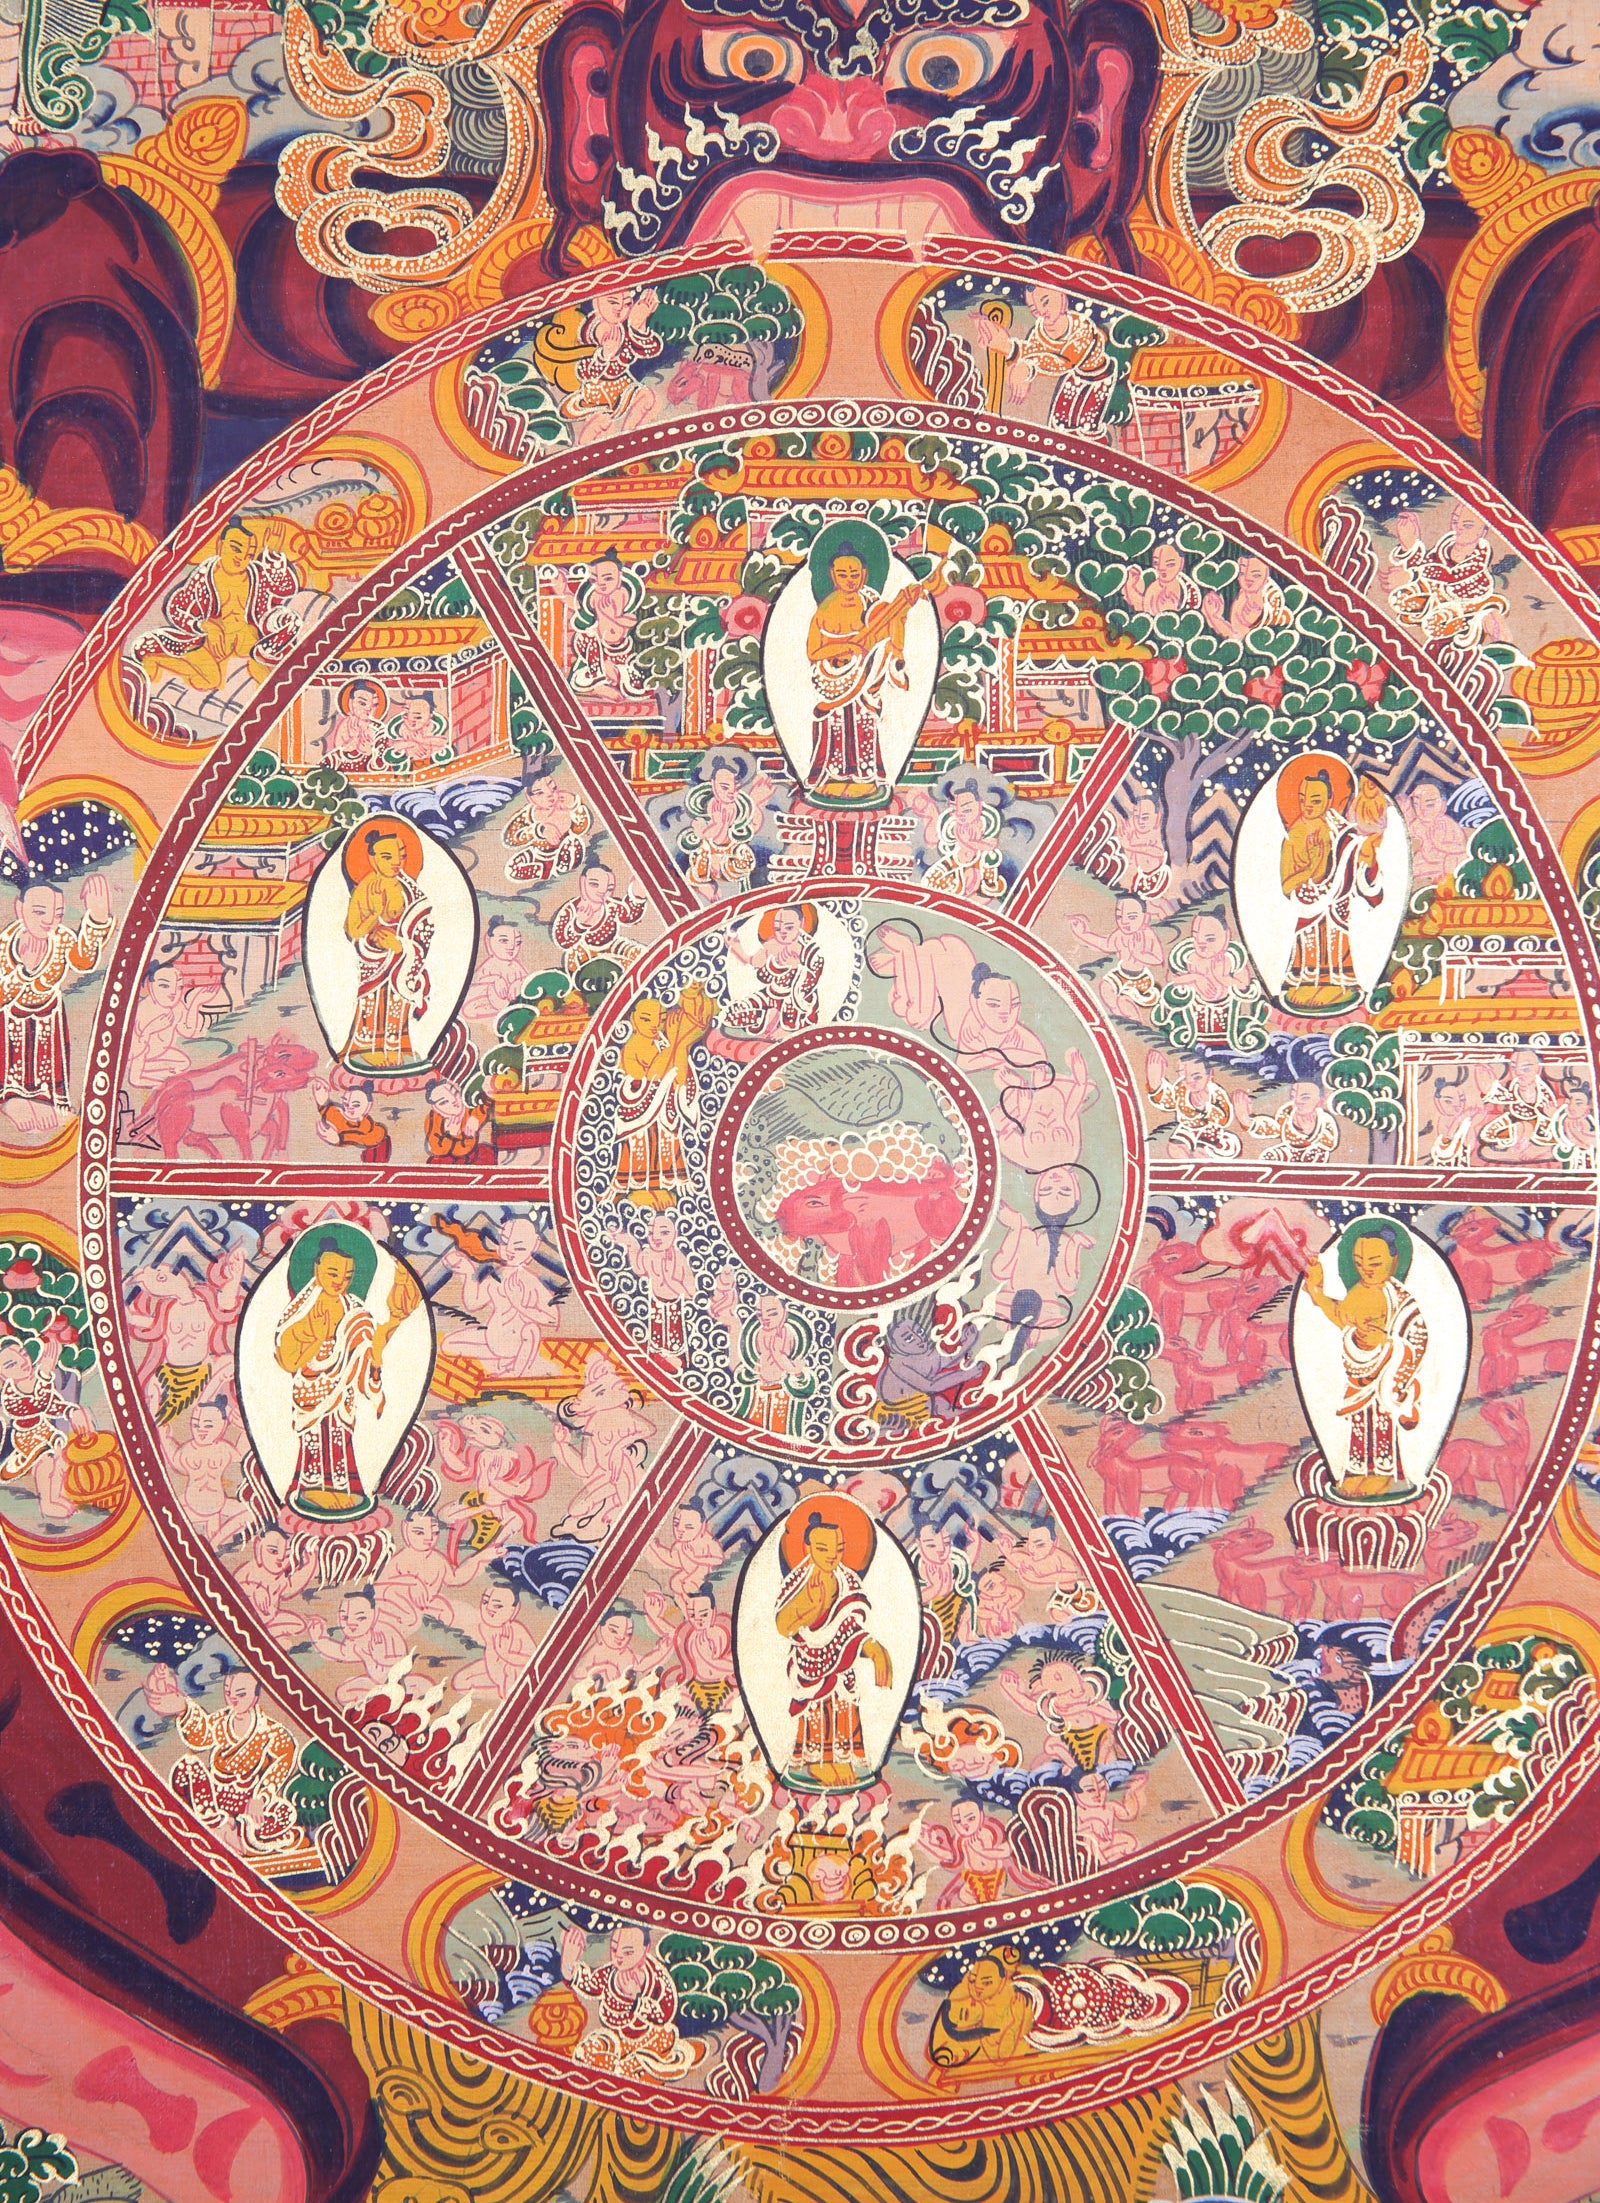 Wheel of Thangka Painting for wall decor.